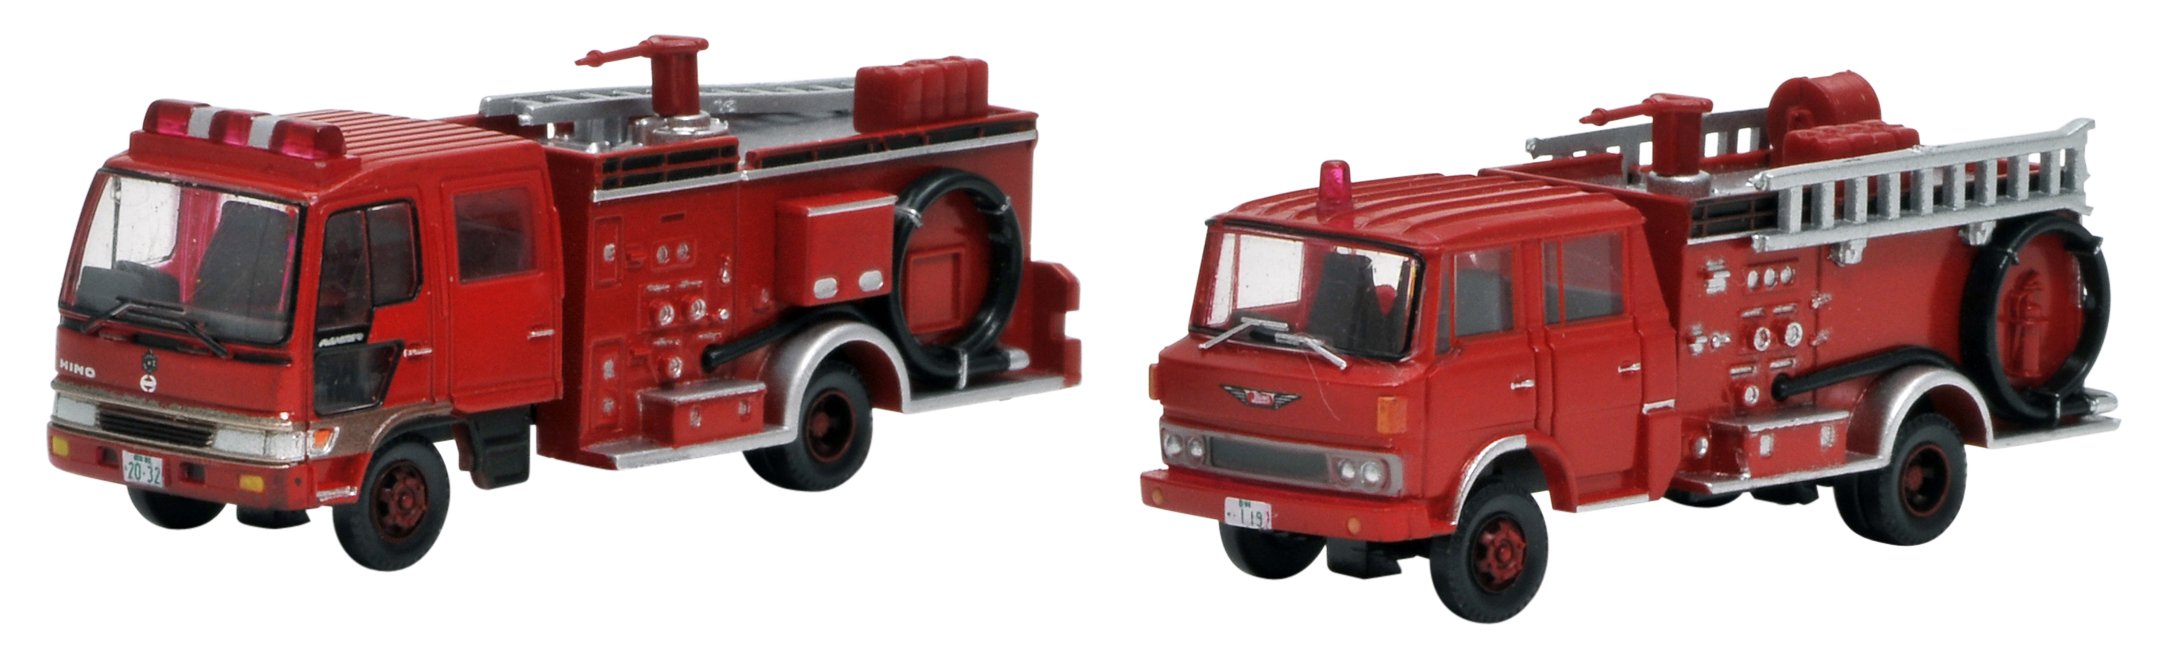 Tomytec Fire Pump Truck Set with Water Tank - Limited Edition Diorama Supplies